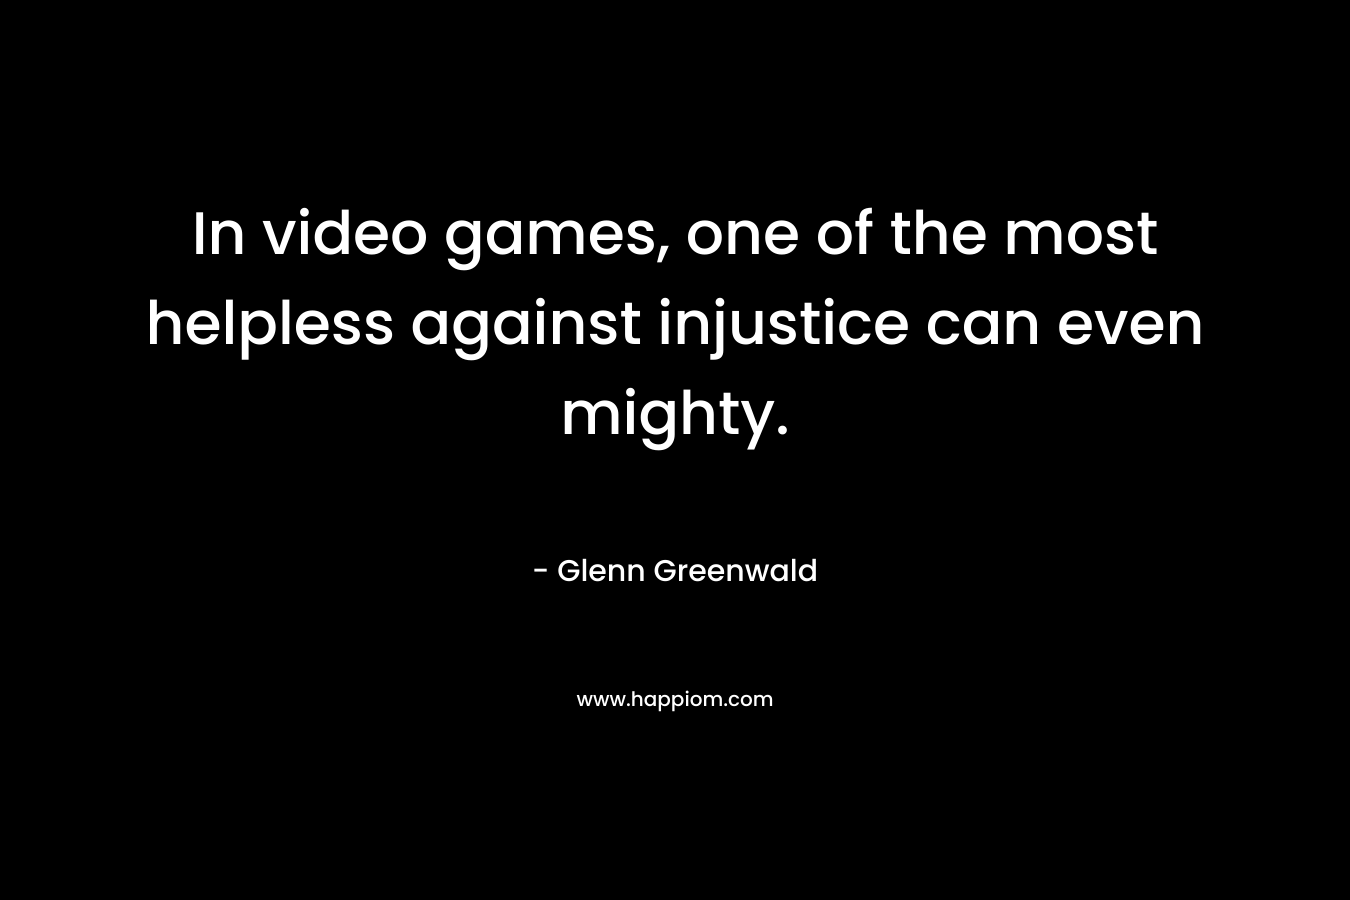 In video games, one of the most helpless against injustice can even mighty. – Glenn Greenwald